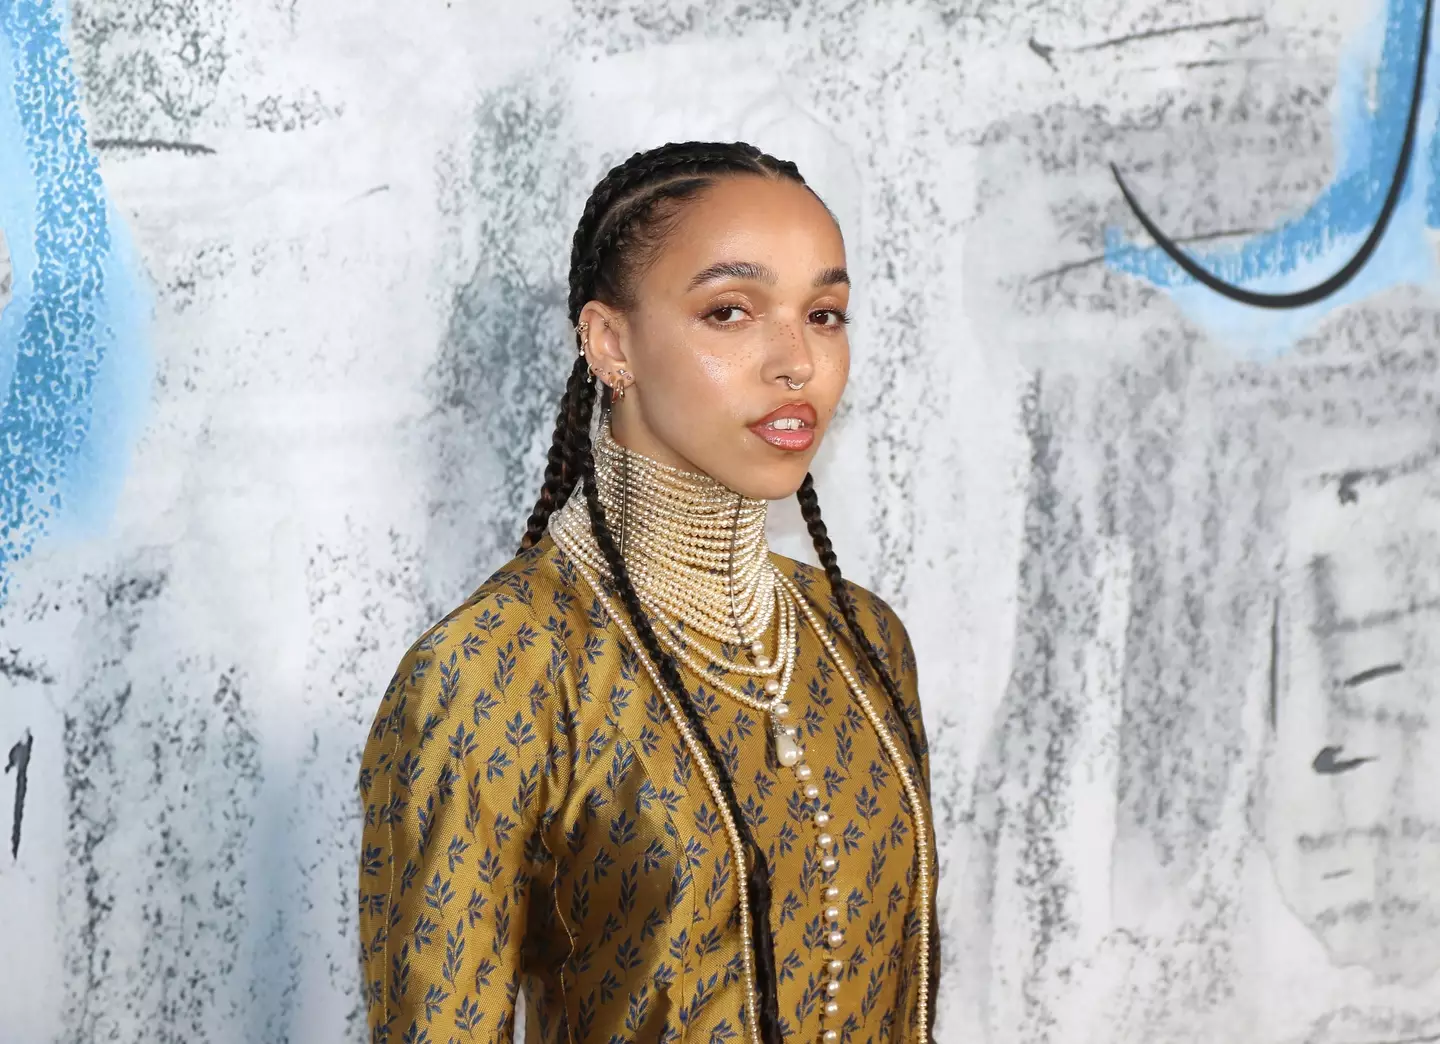 FKA Twigs has a date to go before a jury on April 17, 2023.